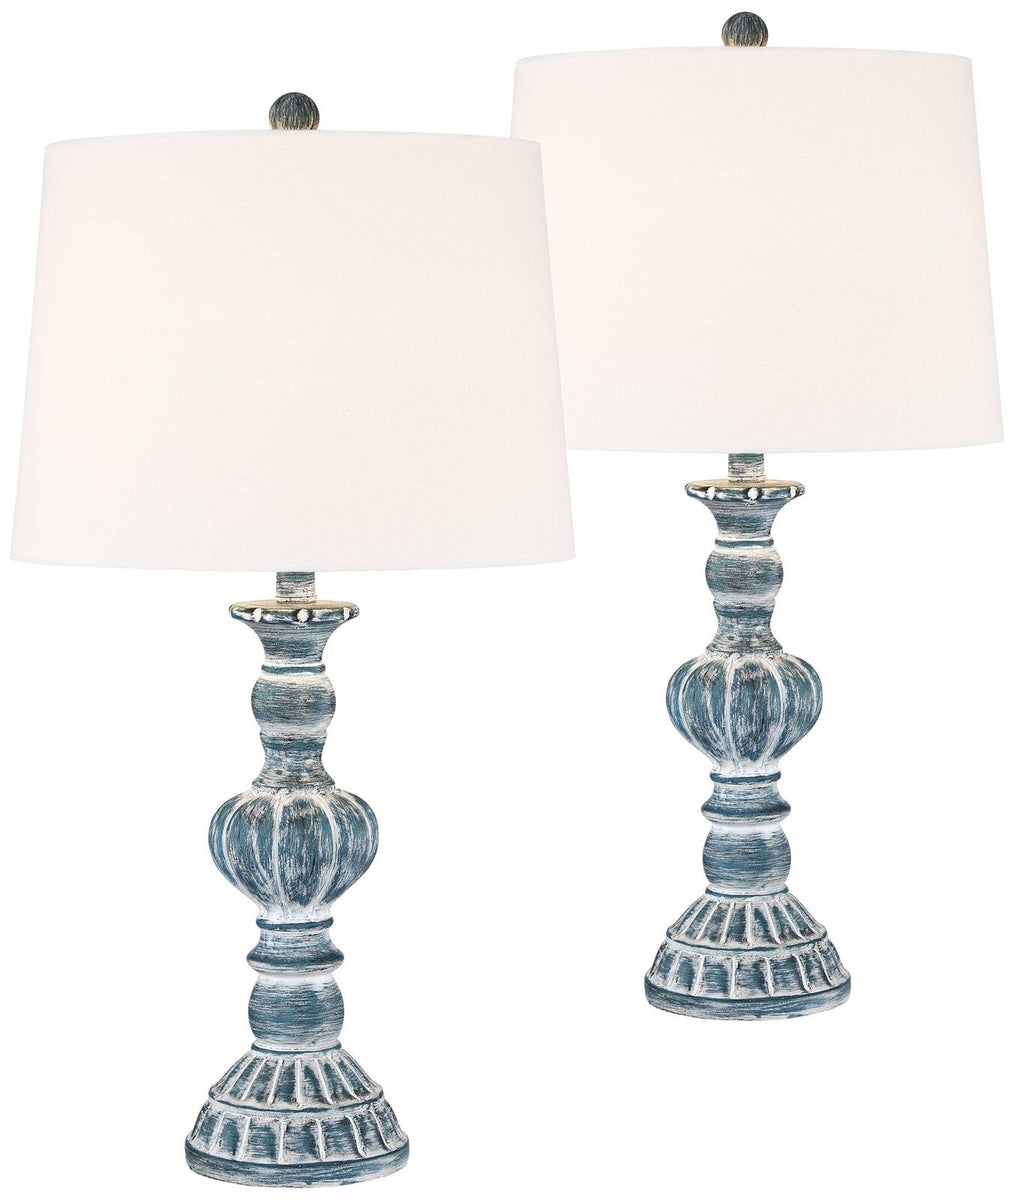 Rustic Table Lamps Set Vintage Design With Blue Wash Bases 2-Piece